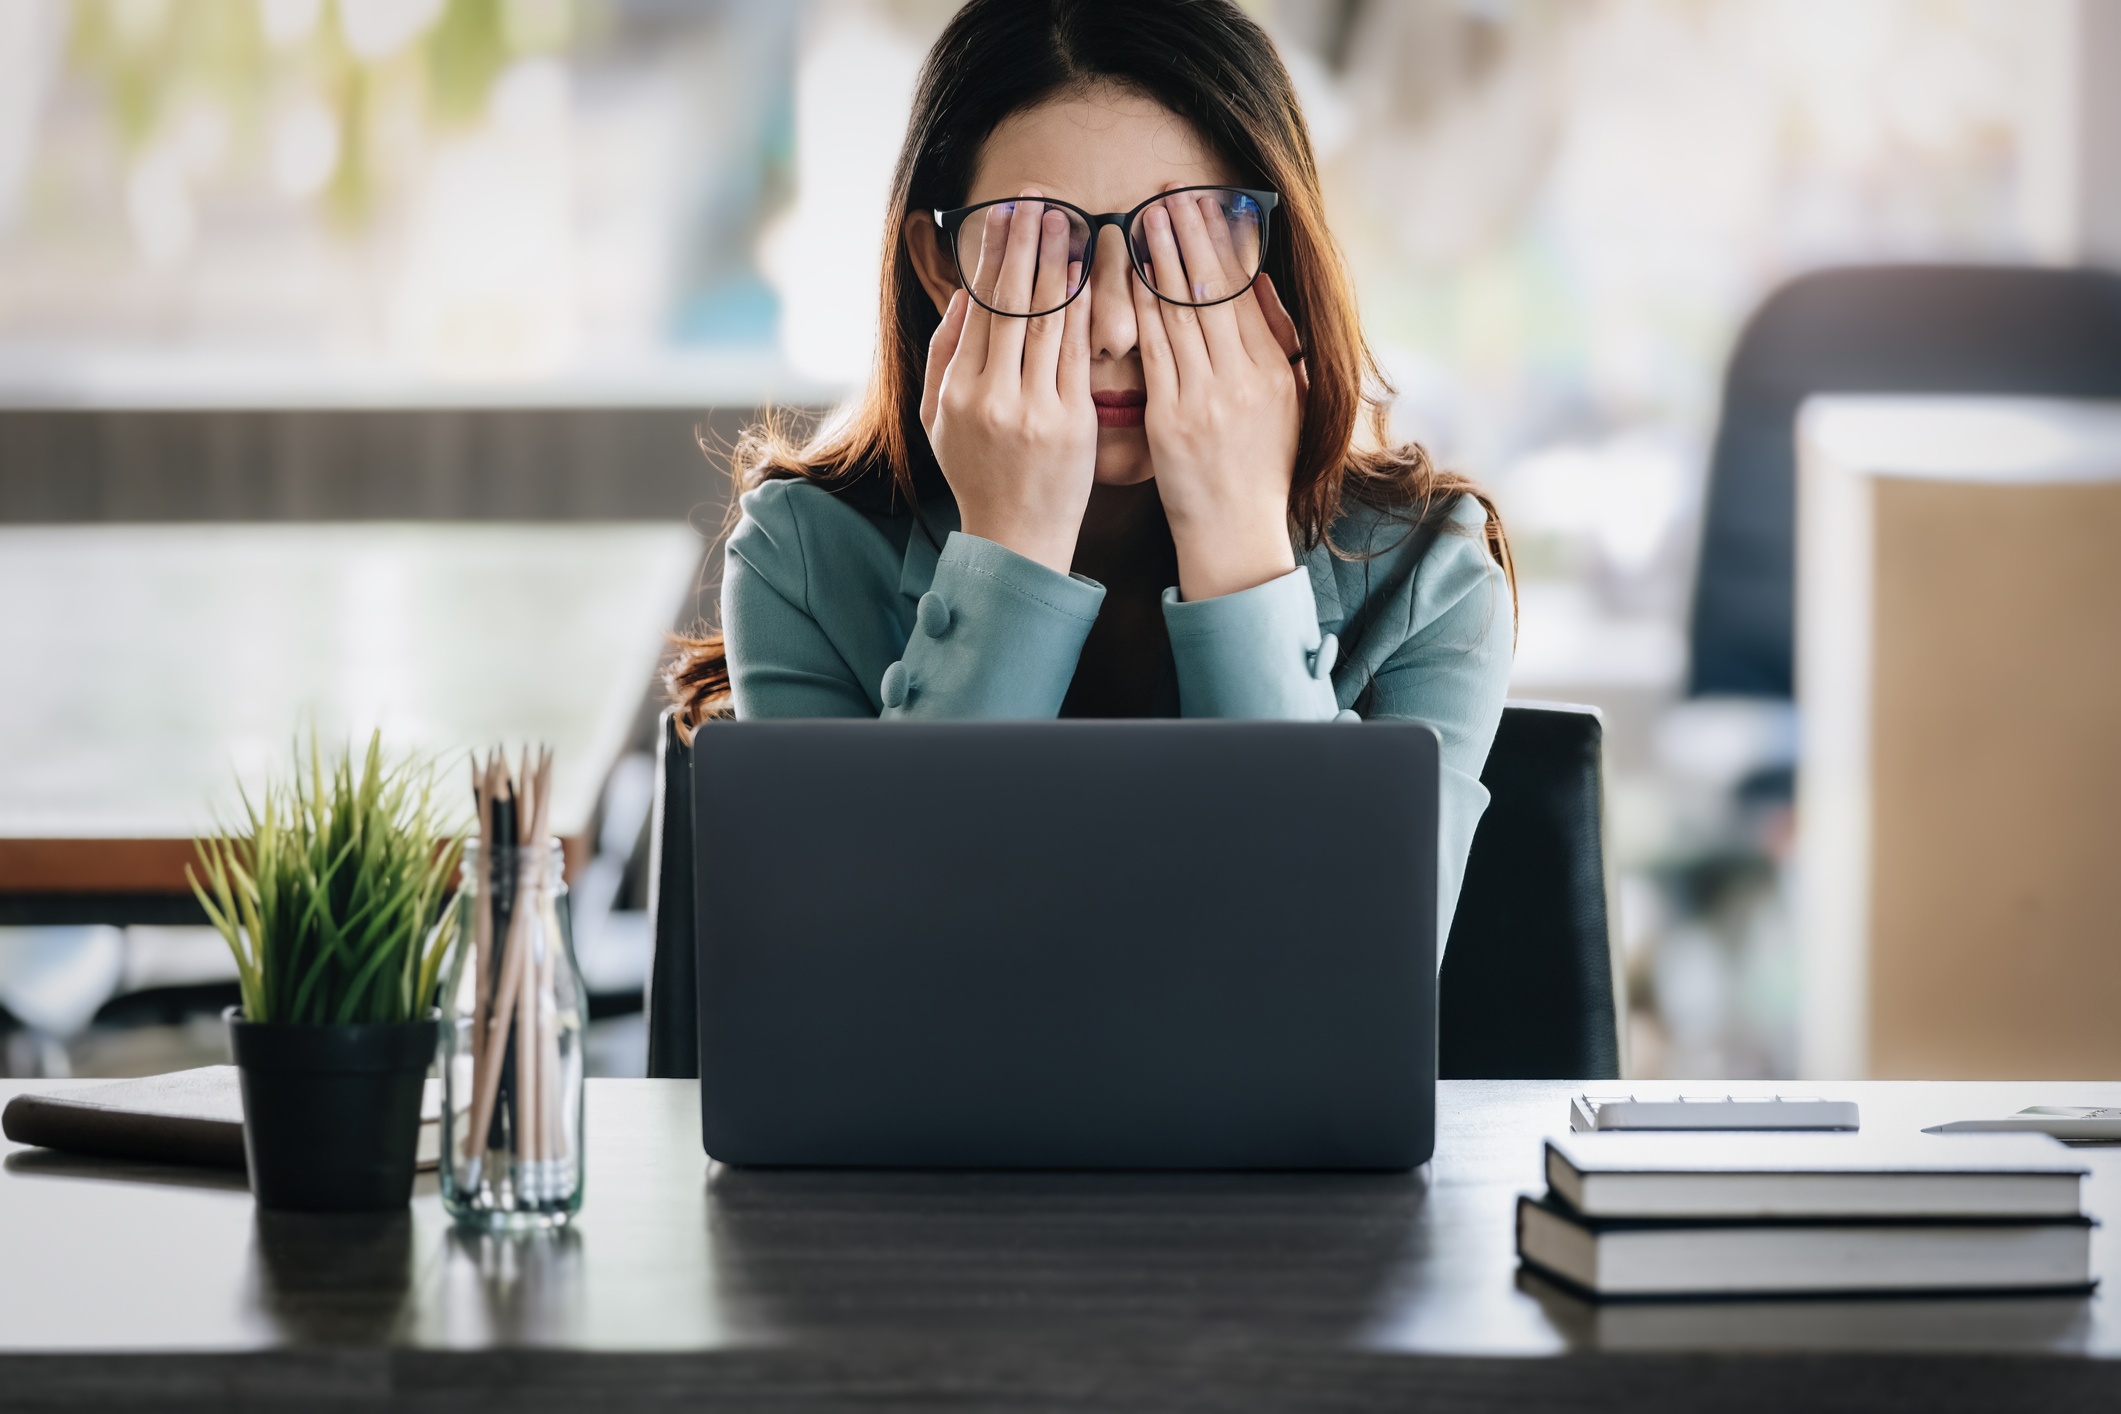 stressed out woman with hands in her face while sitting at her desk